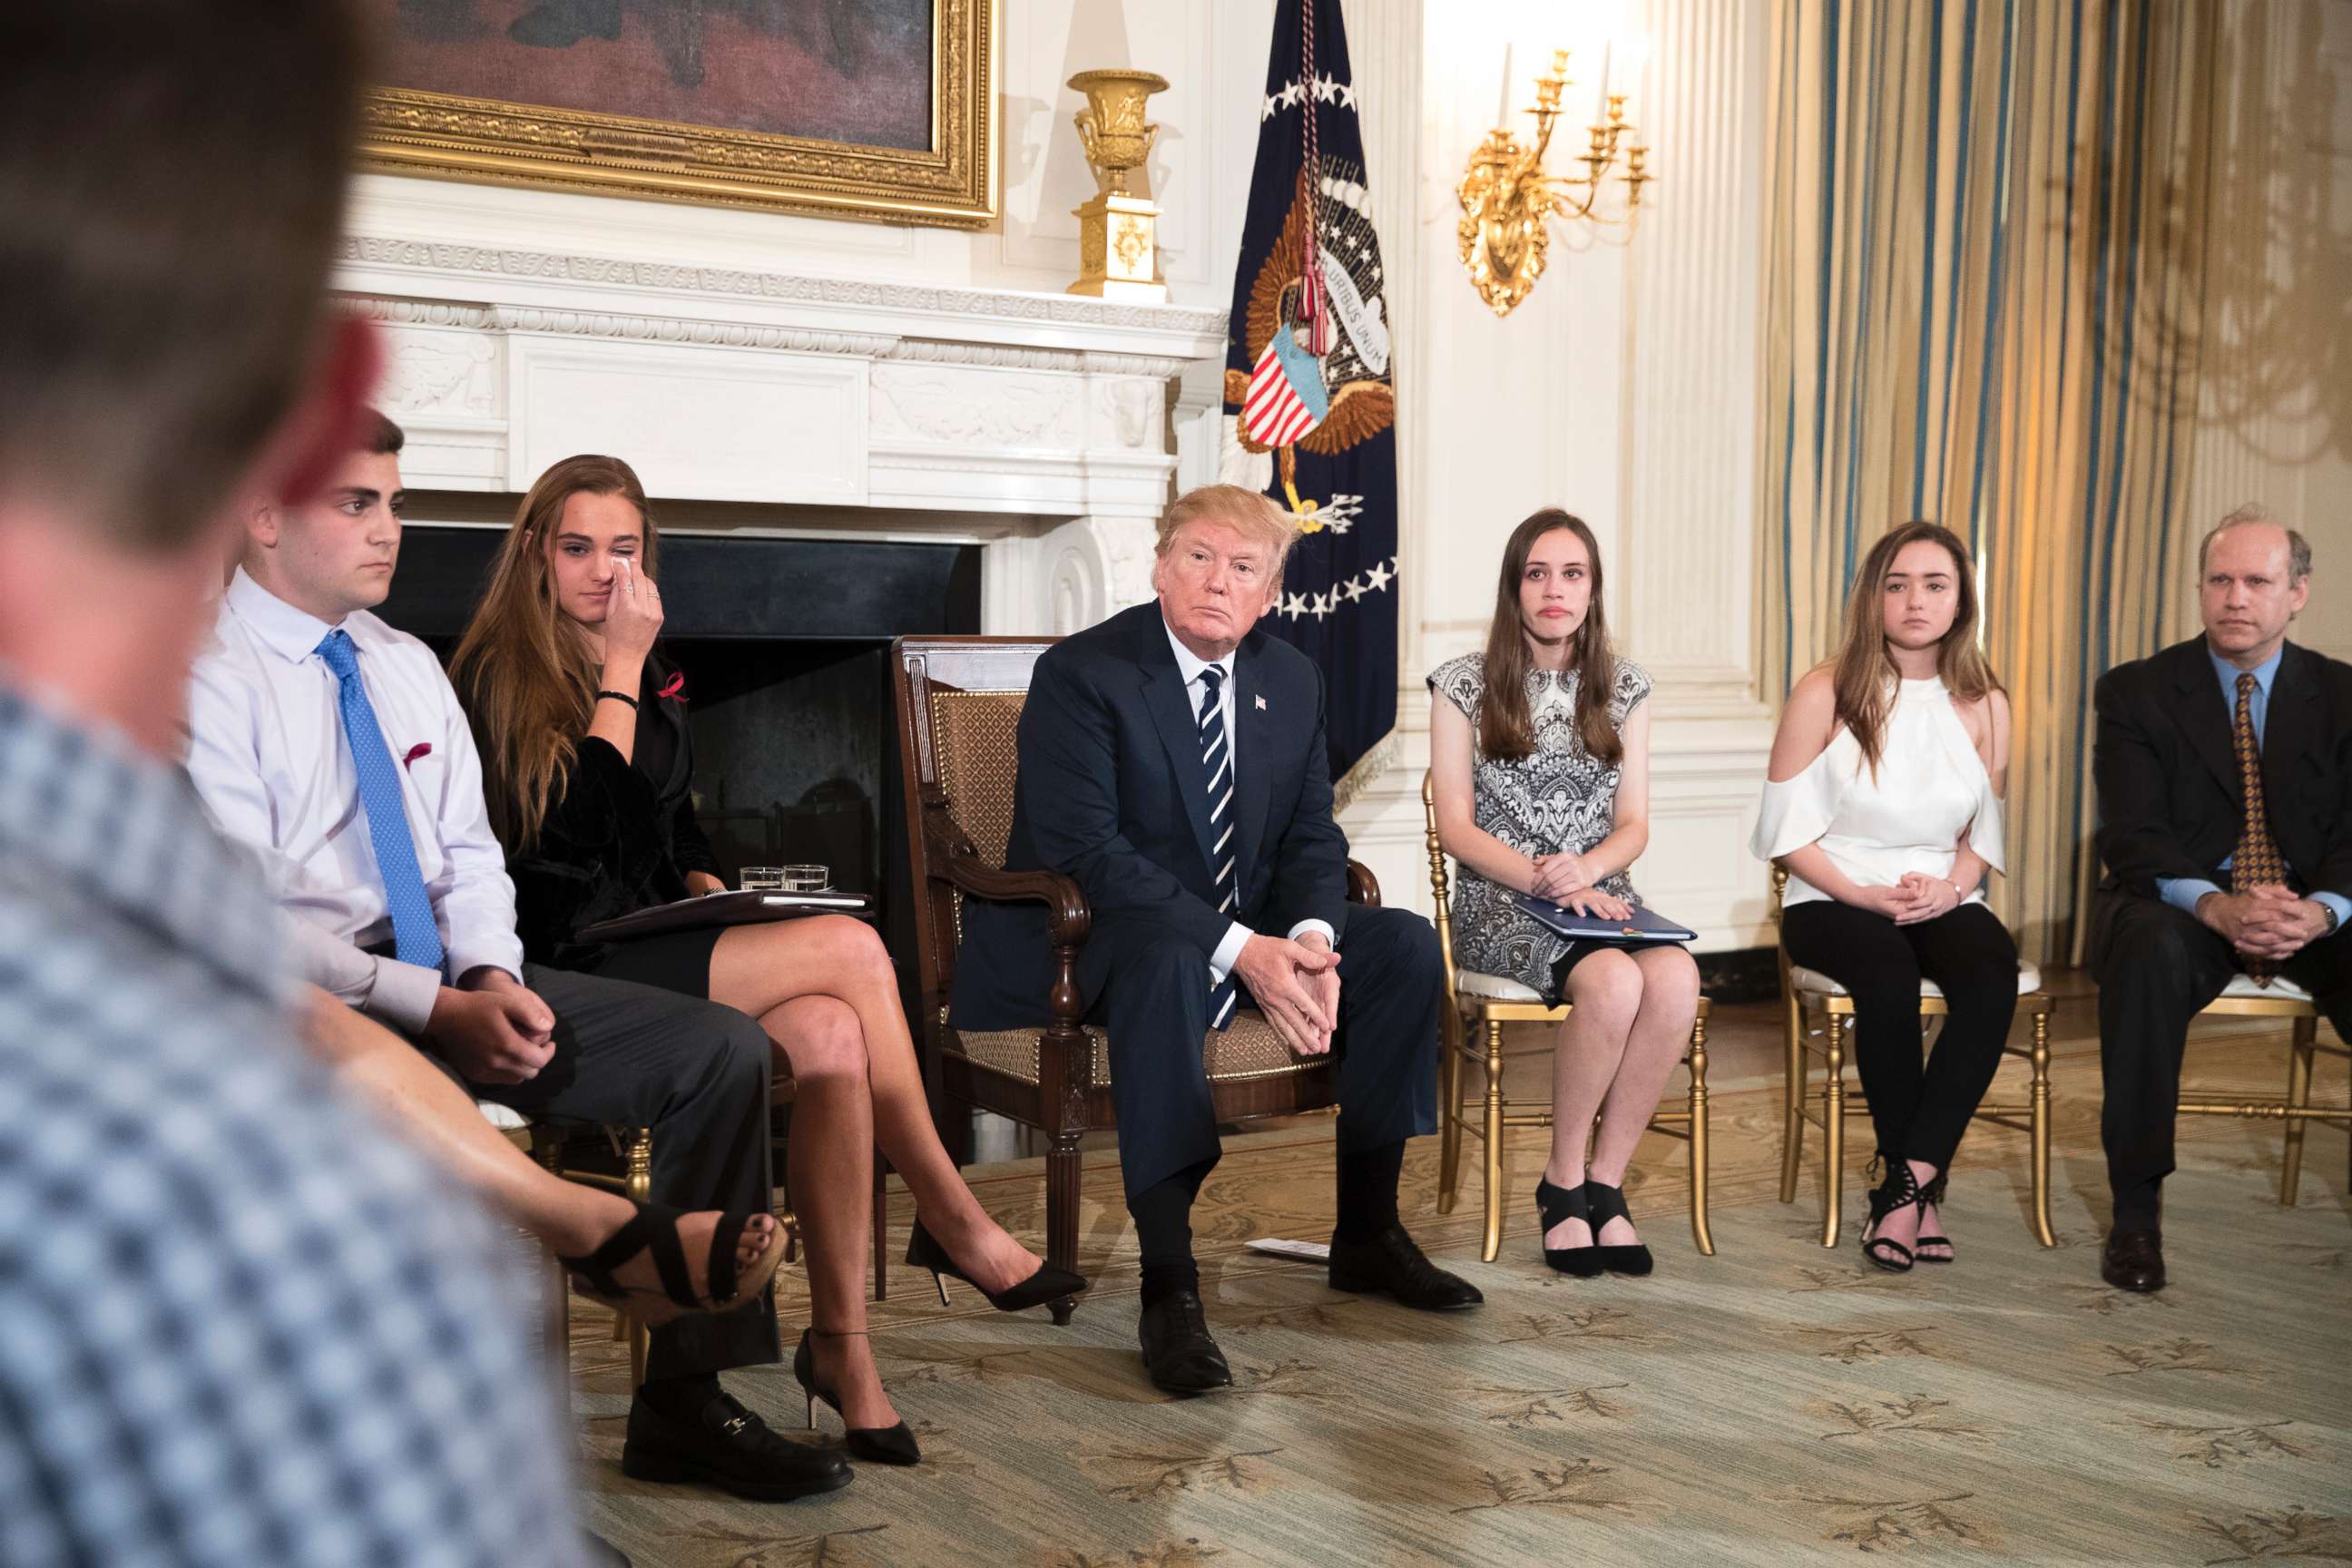 PHOTO: Marjory Stoneman Douglas High School shooting survivor Samuel Zeif, left, speaks to President Trump during a listening session with high school students and teachers, at the White House in Washington, Feb. 21, 2018.